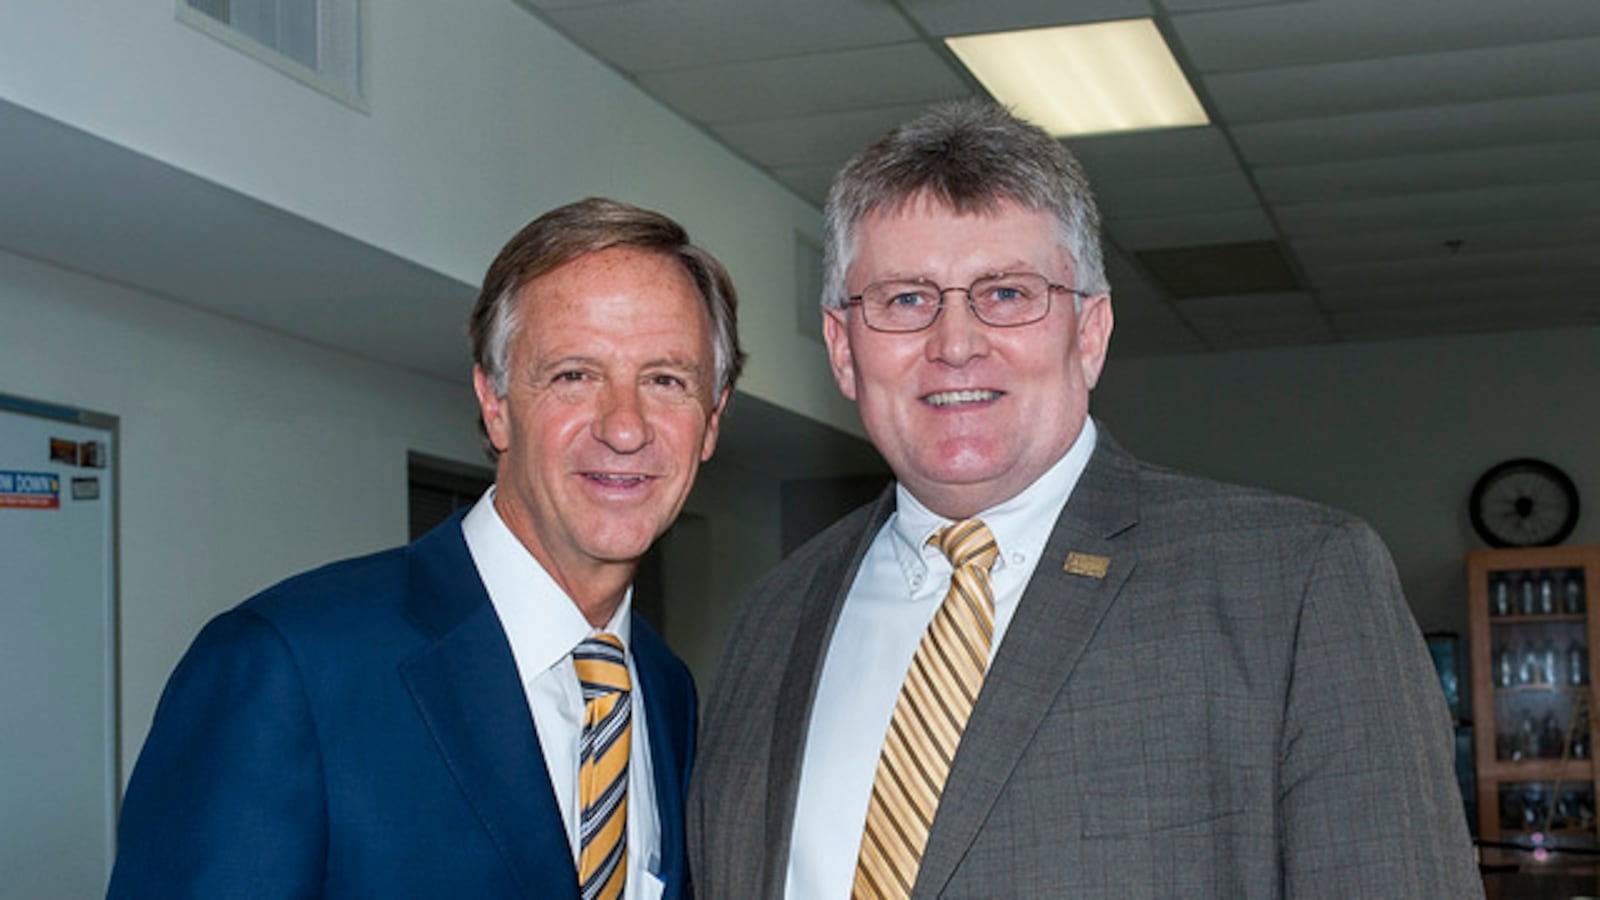 Lyle Ailshie (right) has been appointed interim education commissioner by outgoing Gov. Bill Haslam. (Photo courtesy of Tennessee Department of Education)